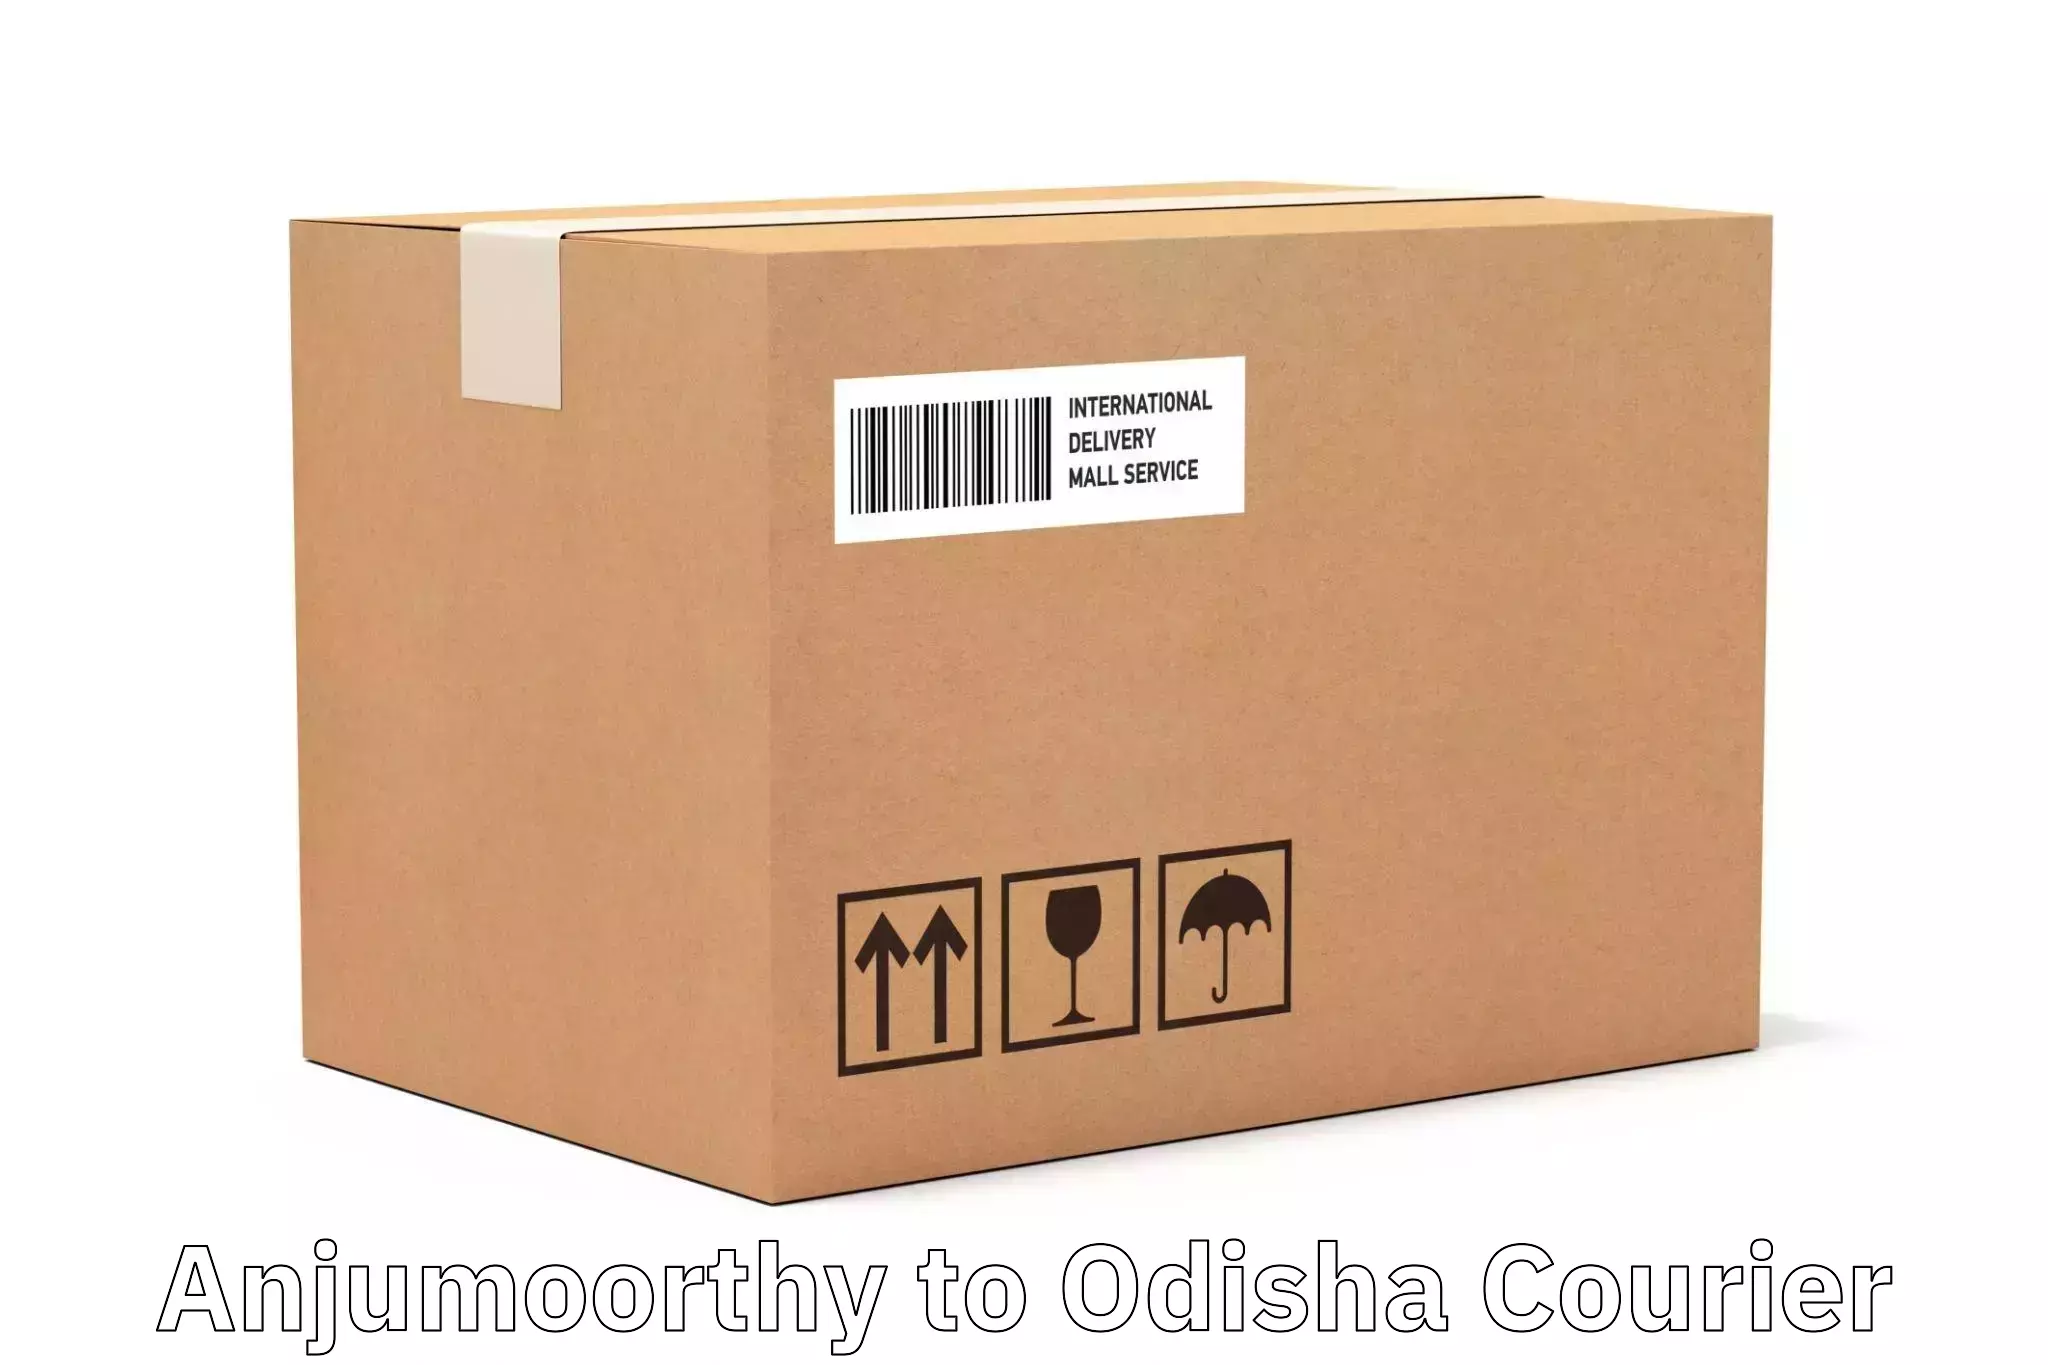 Dynamic courier operations Anjumoorthy to Dhenkanal